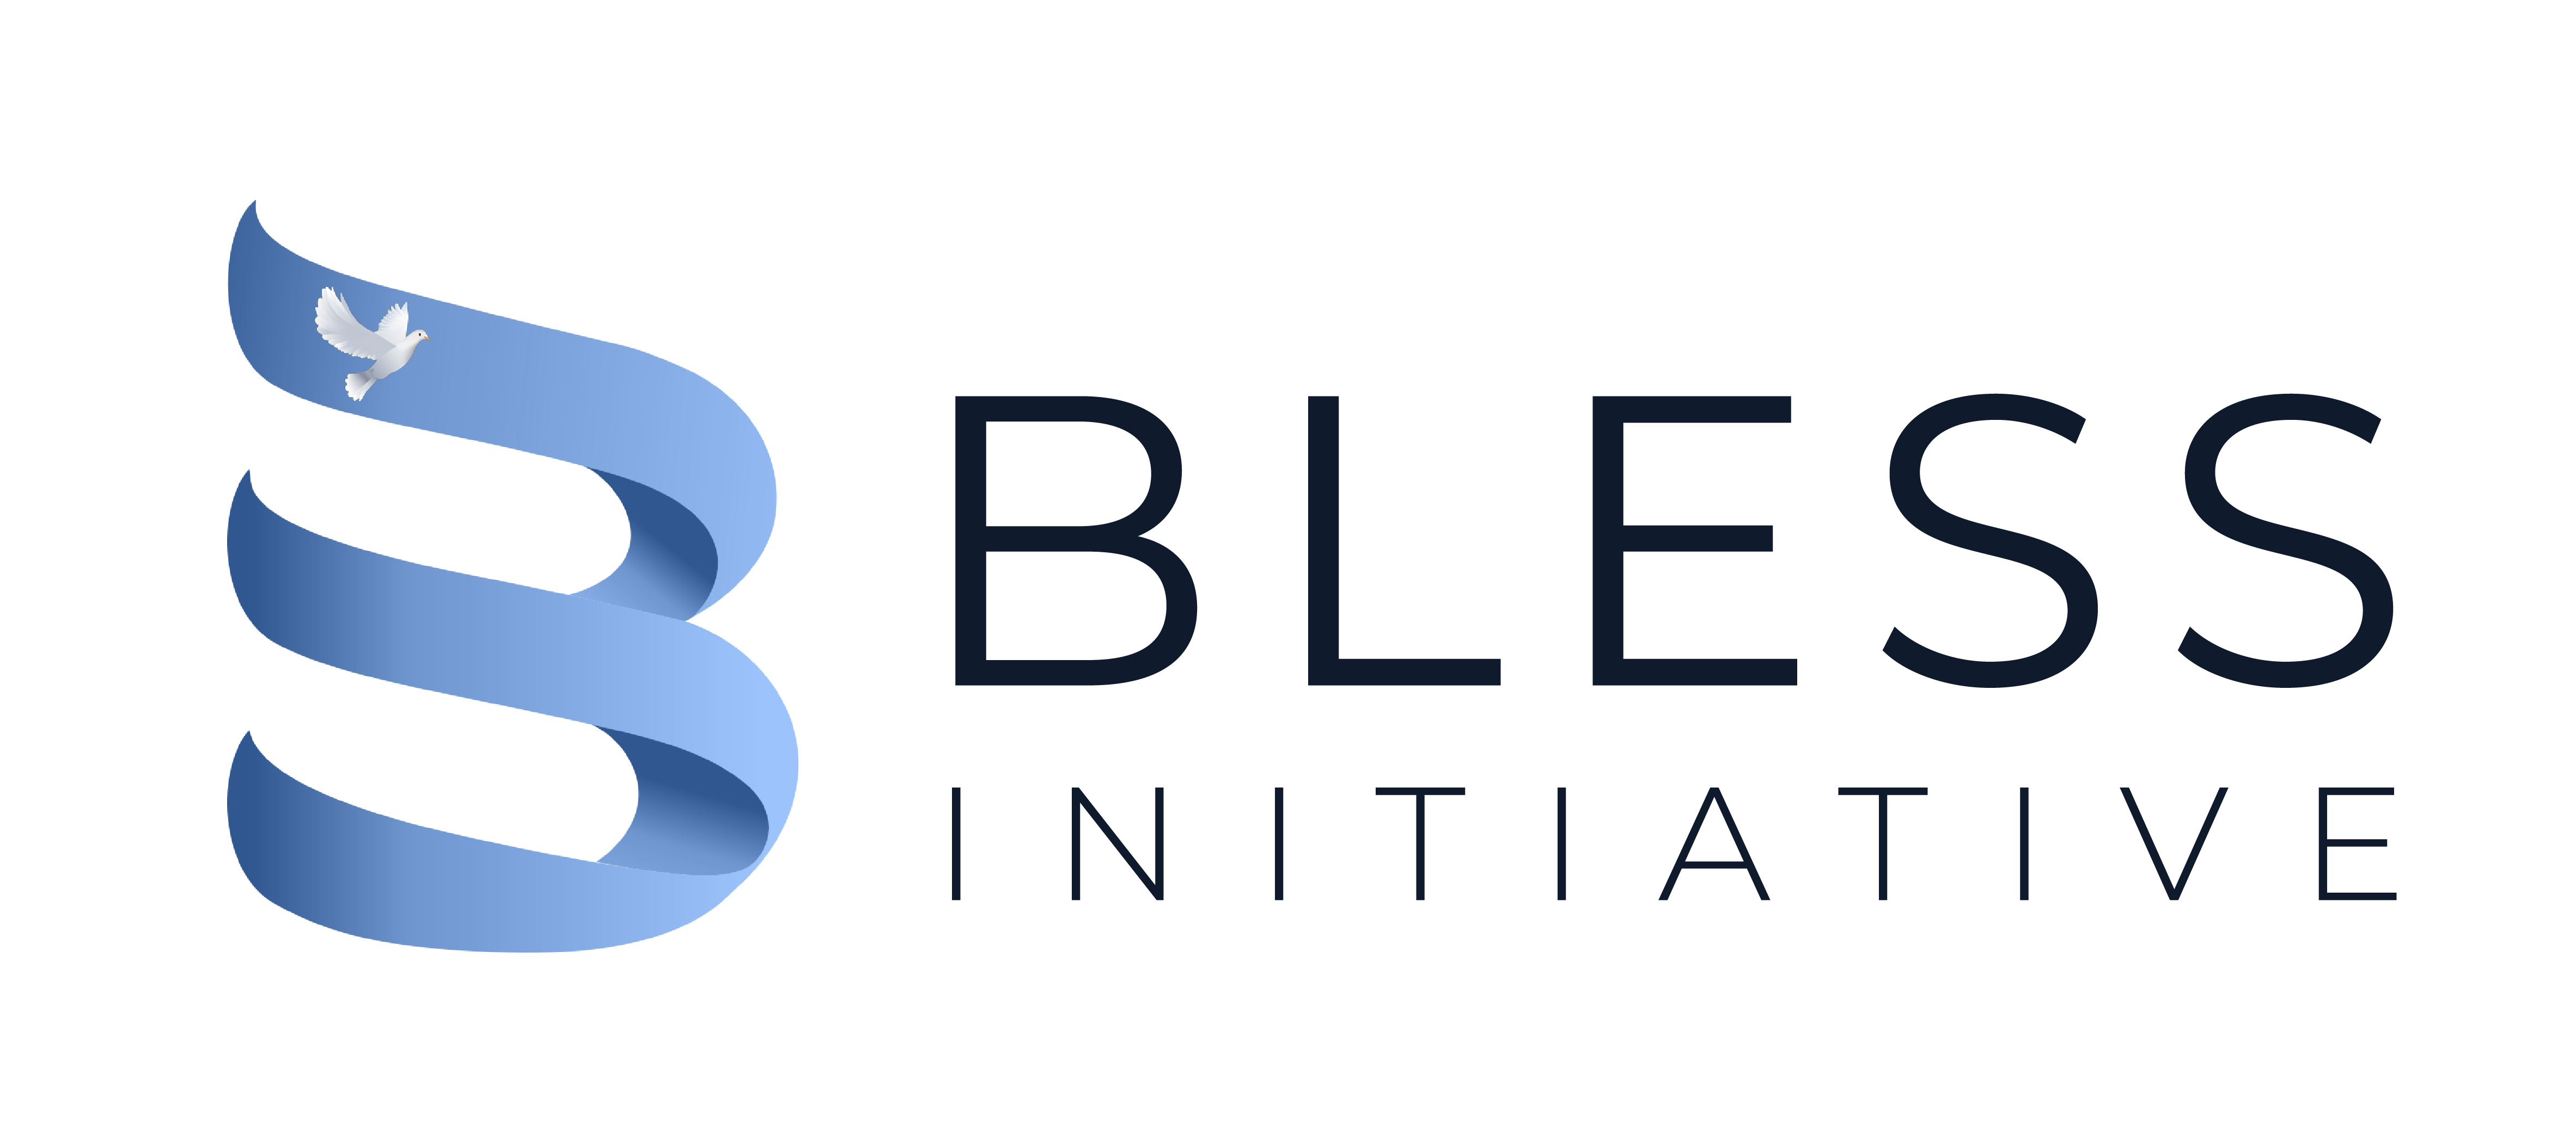 The Bless Initiative